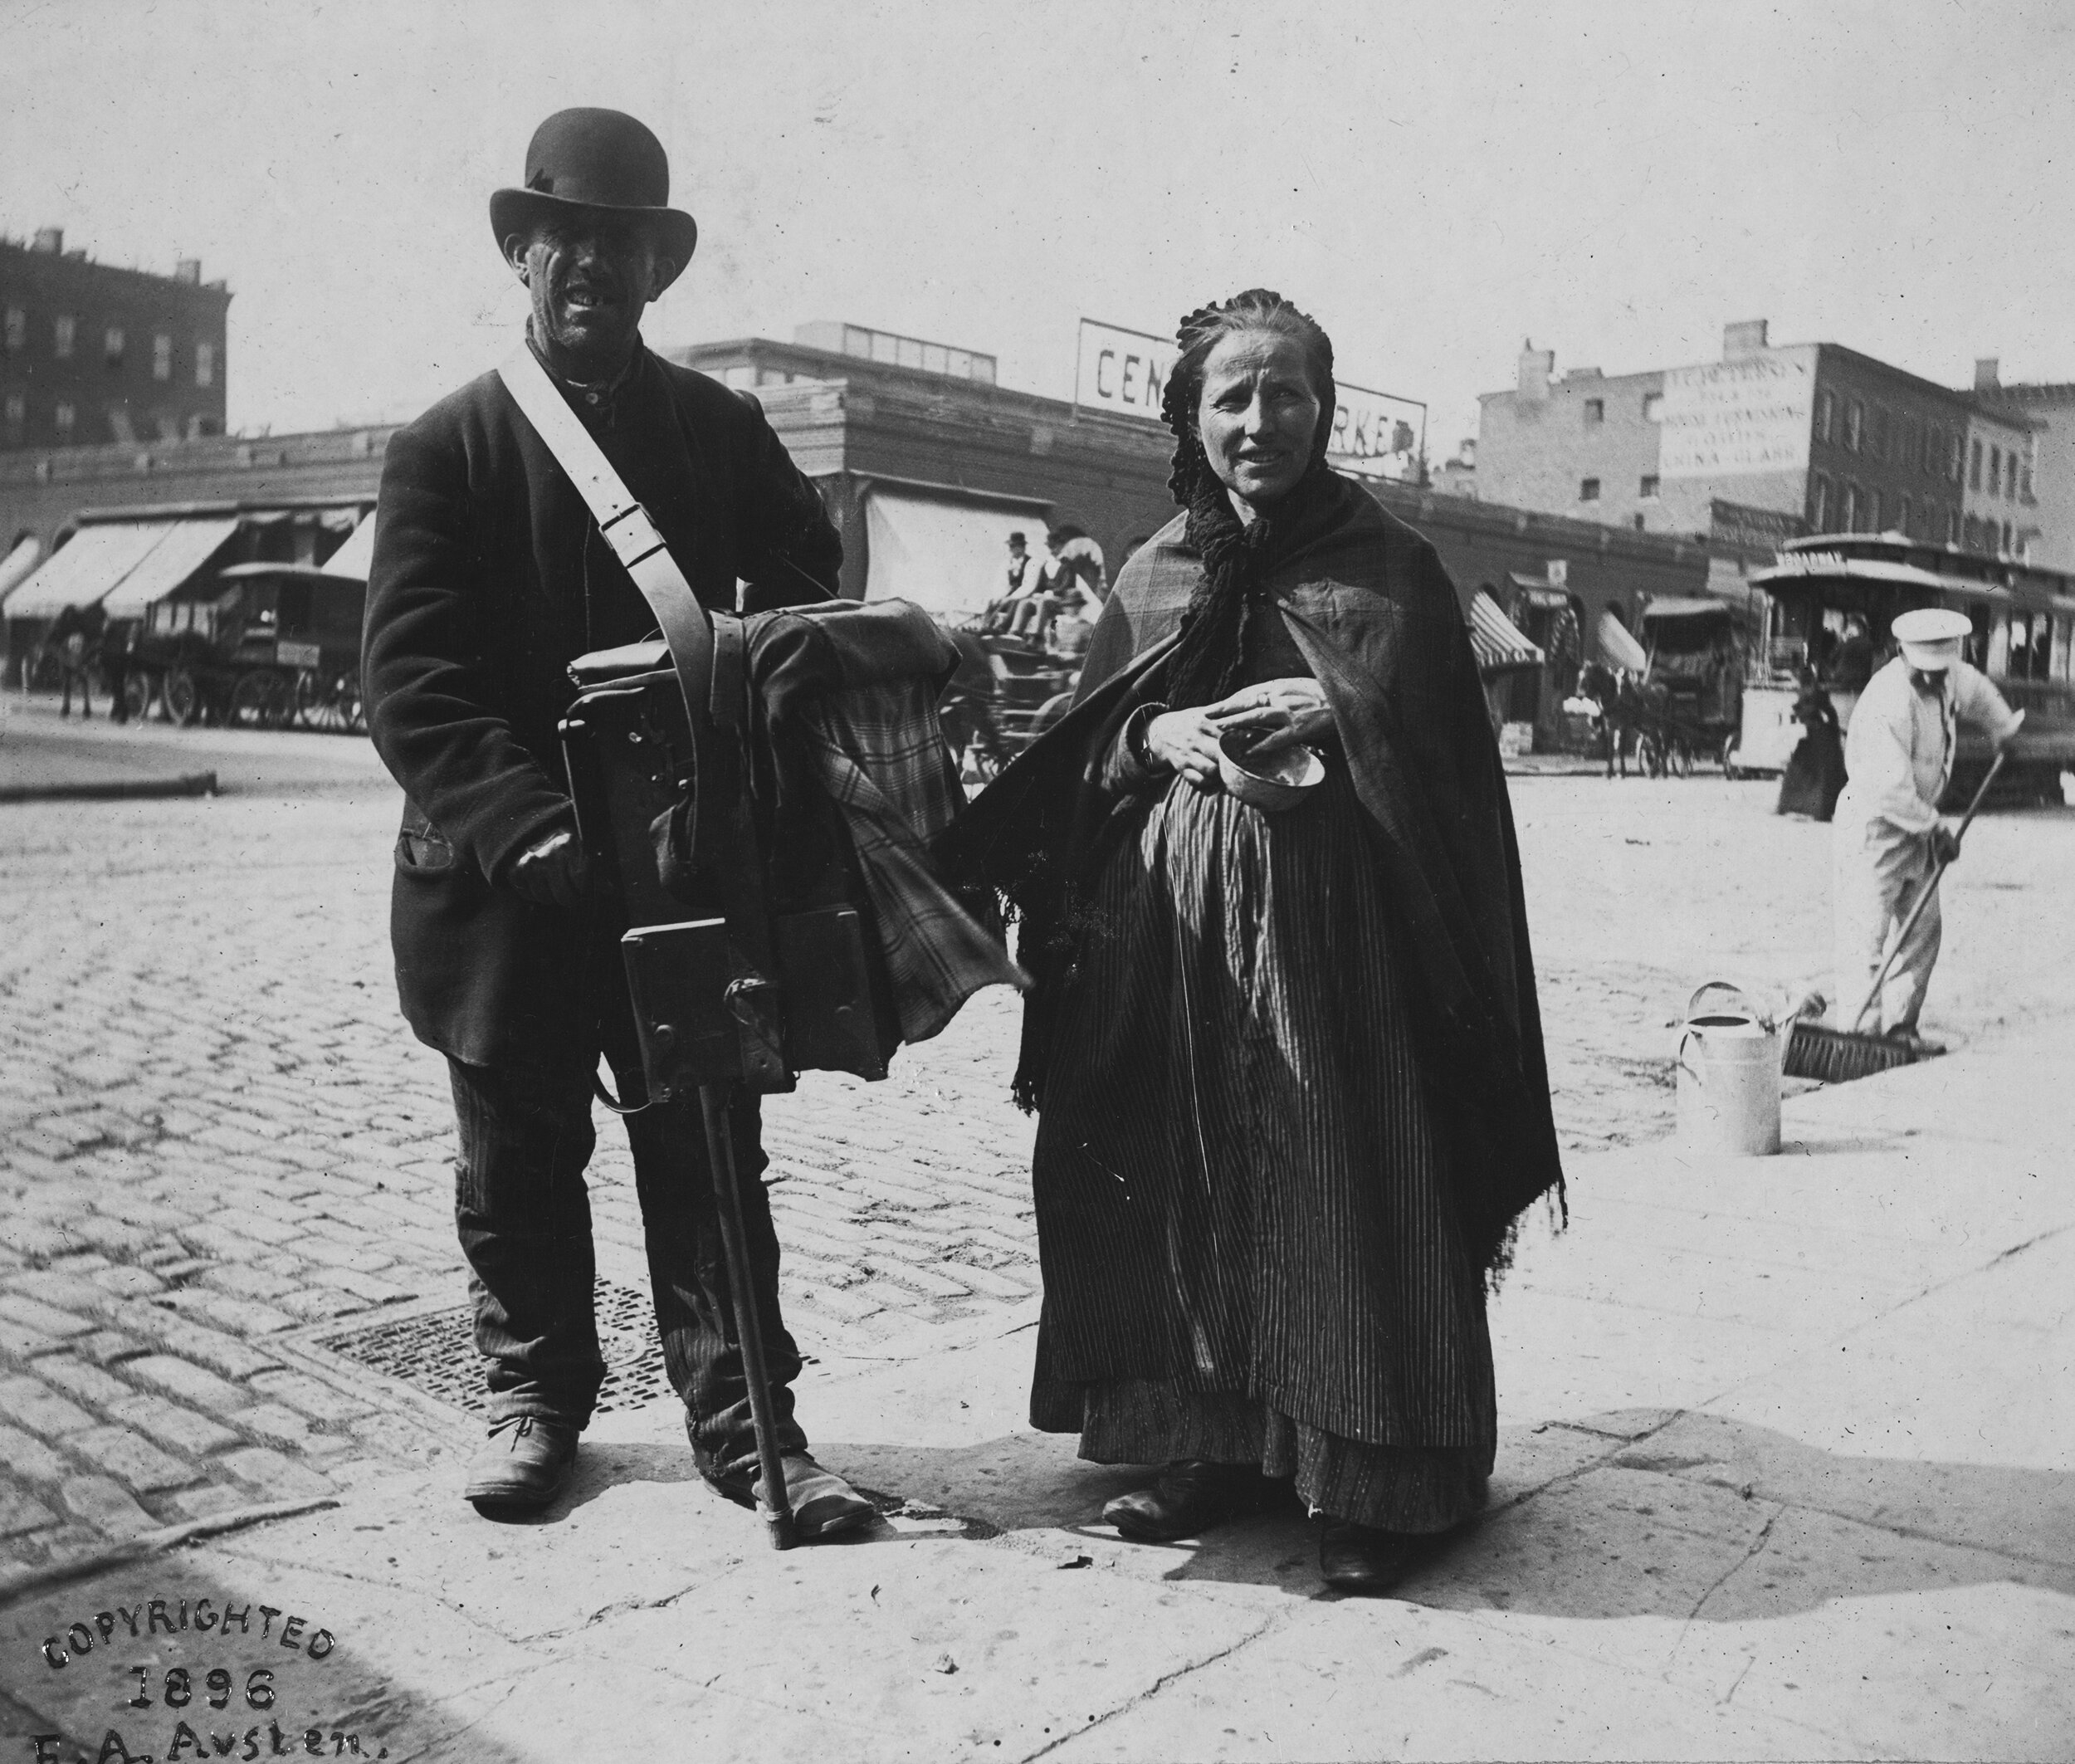   Organ Grinder and Wife, Forty-eight Street and Broadway  Collection of Historic Richmond Town, 50.015.2415 